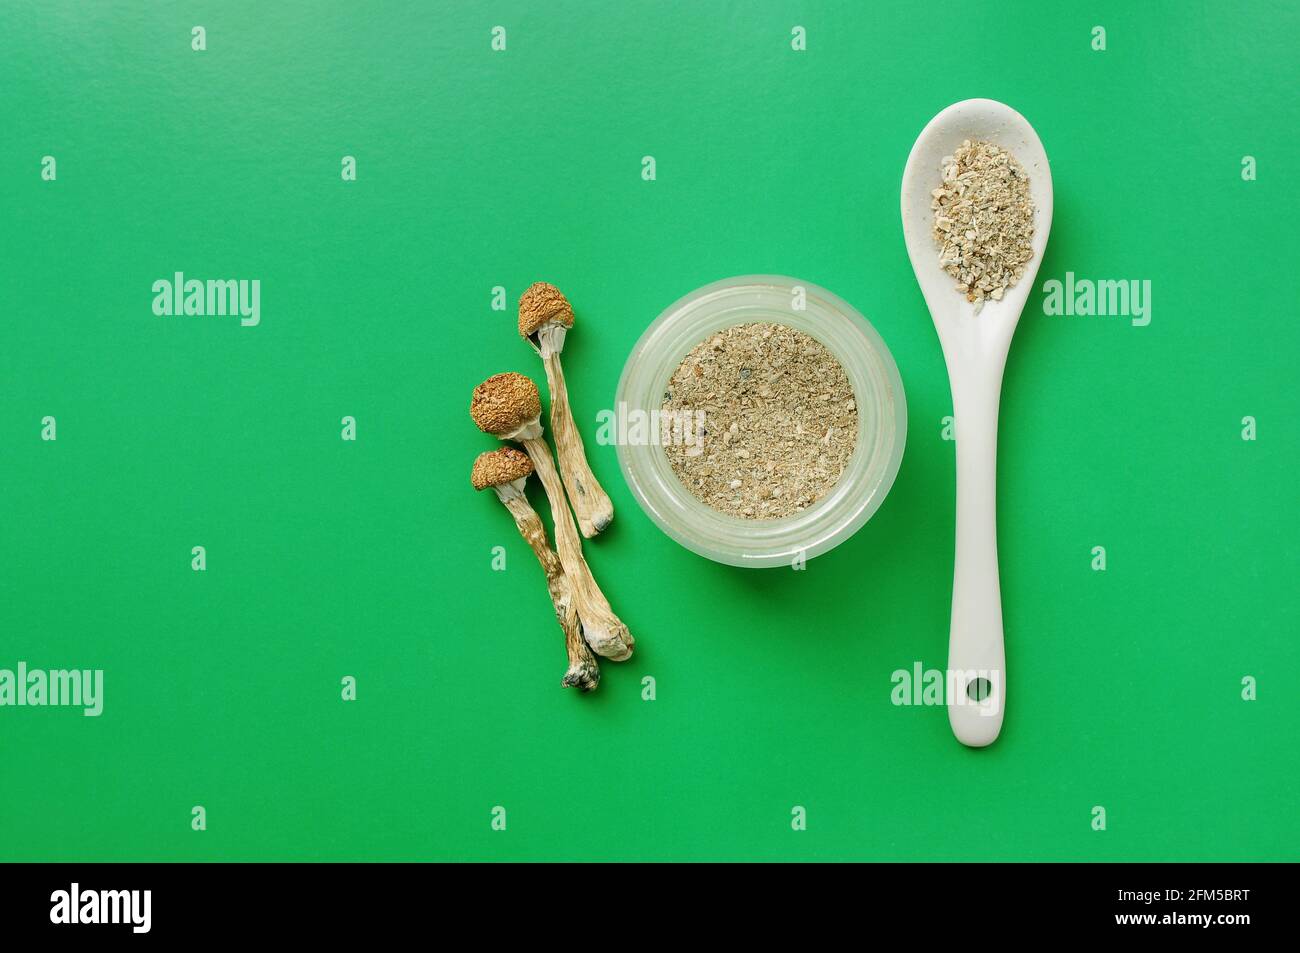 Microdosing concept. Dry psilocybin mushrooms on green background. Natural organic supplement. Medical usage. Psychedelic magic trip. Stock Photo